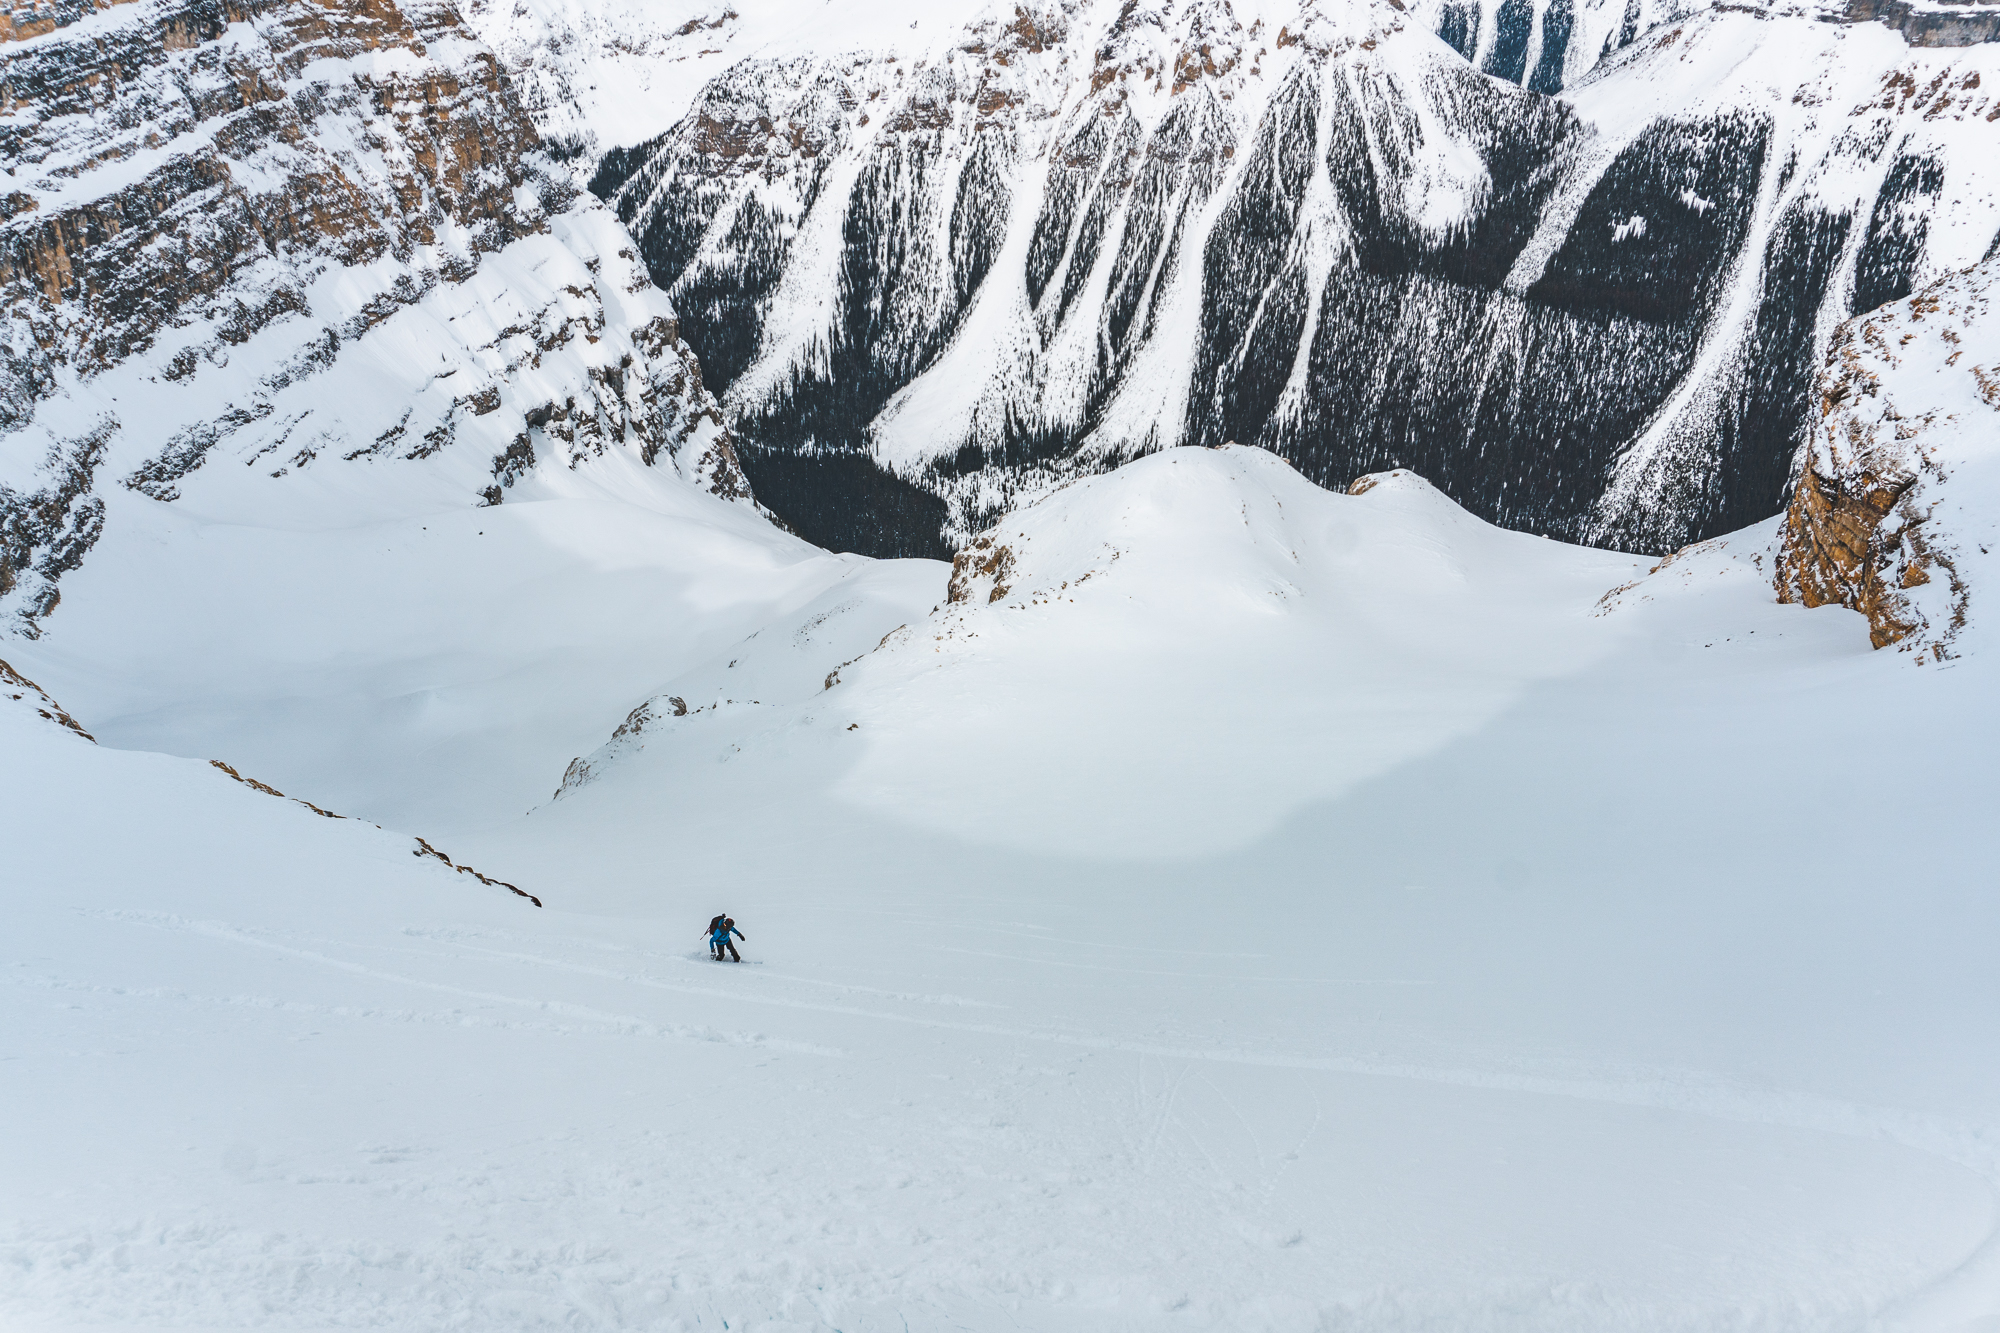 Skiing the upper pitches of Mt. Whymper